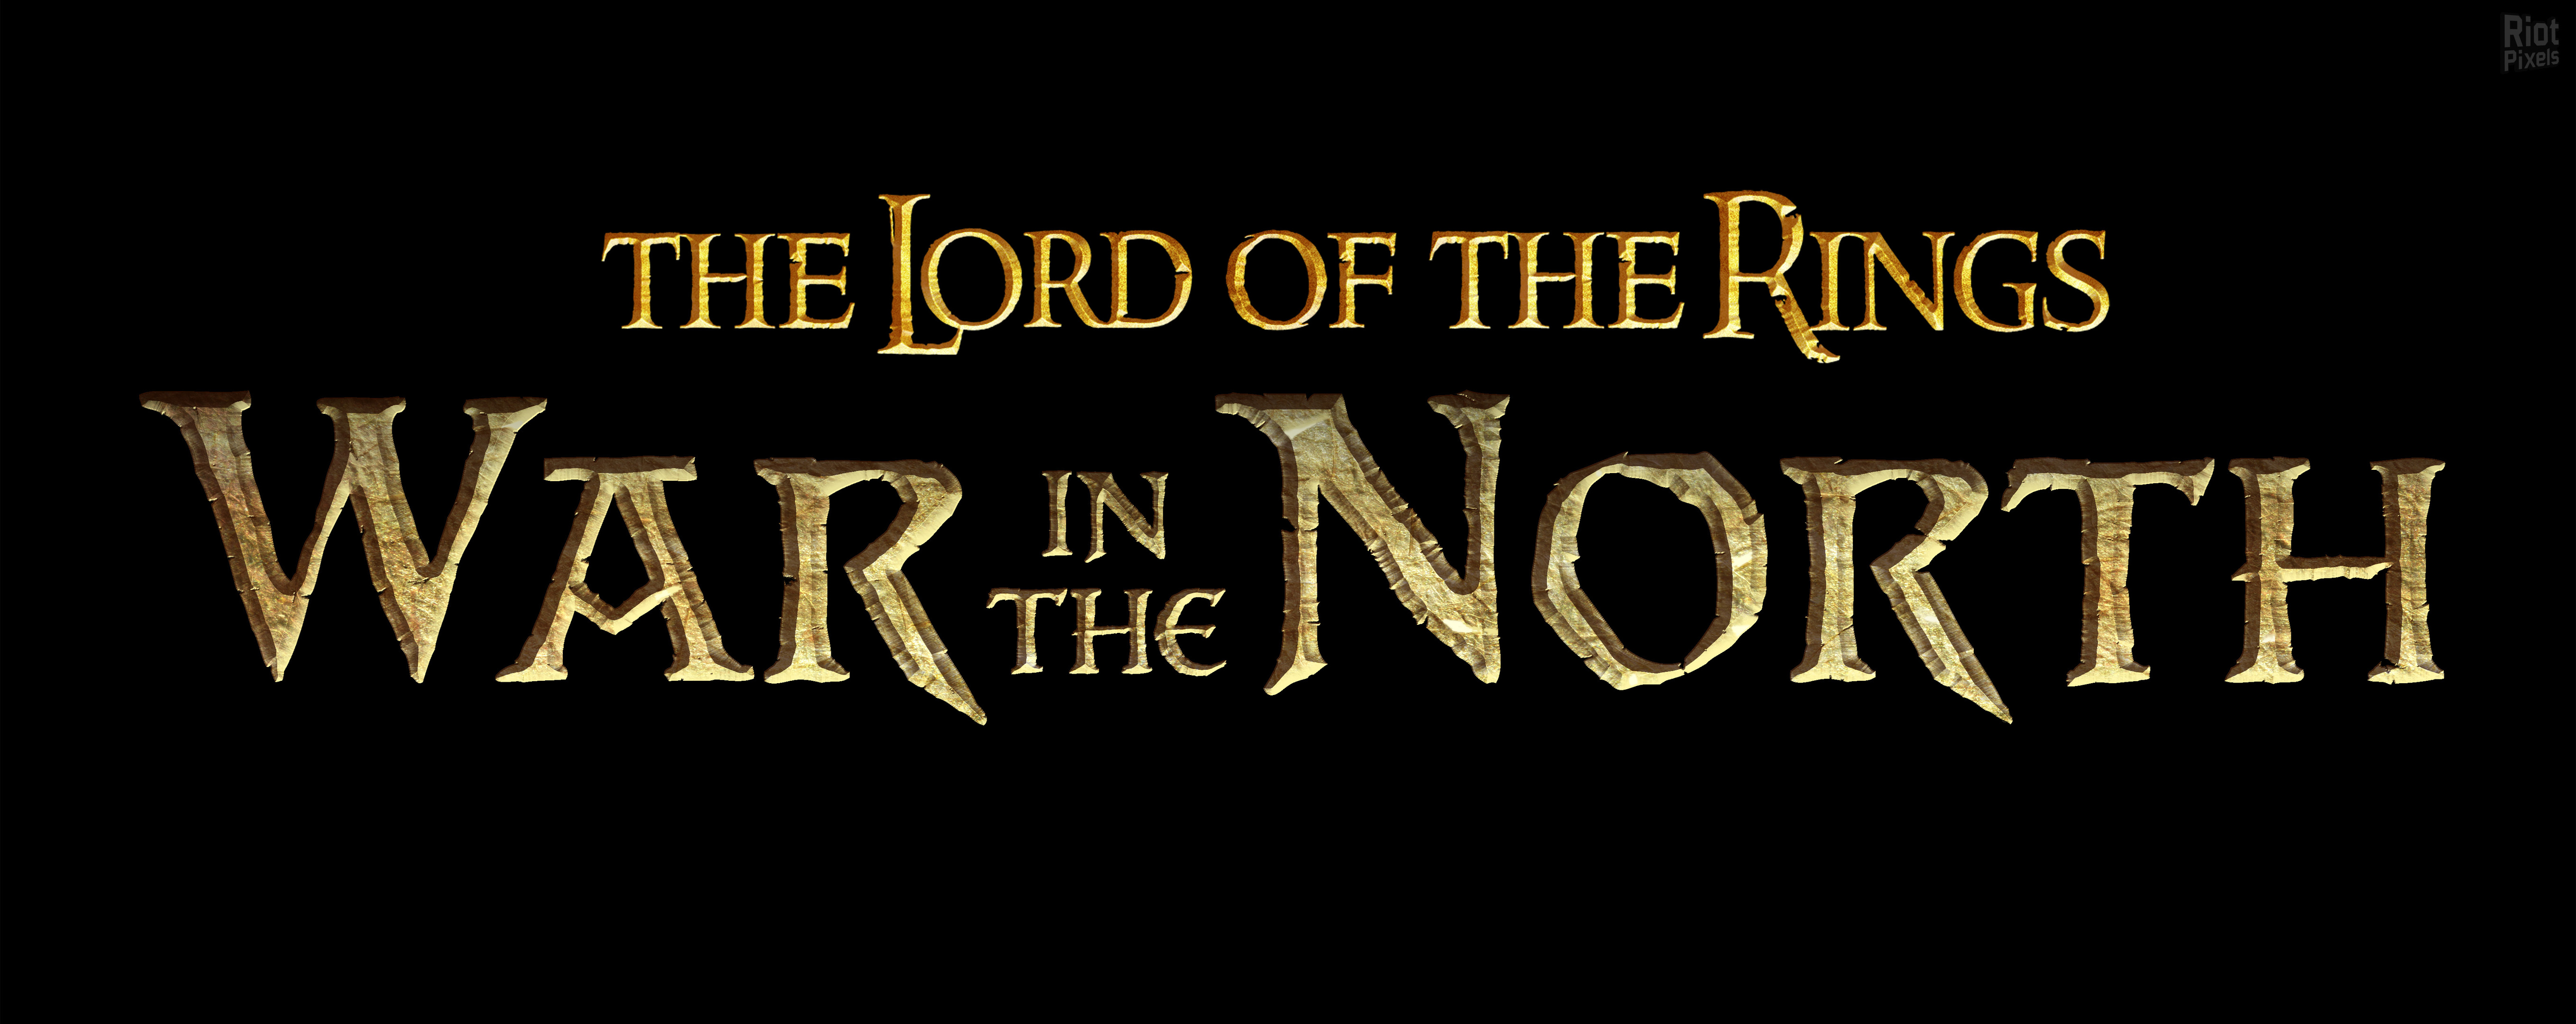 The lord of the rings war in the north купить ключ steam фото 56